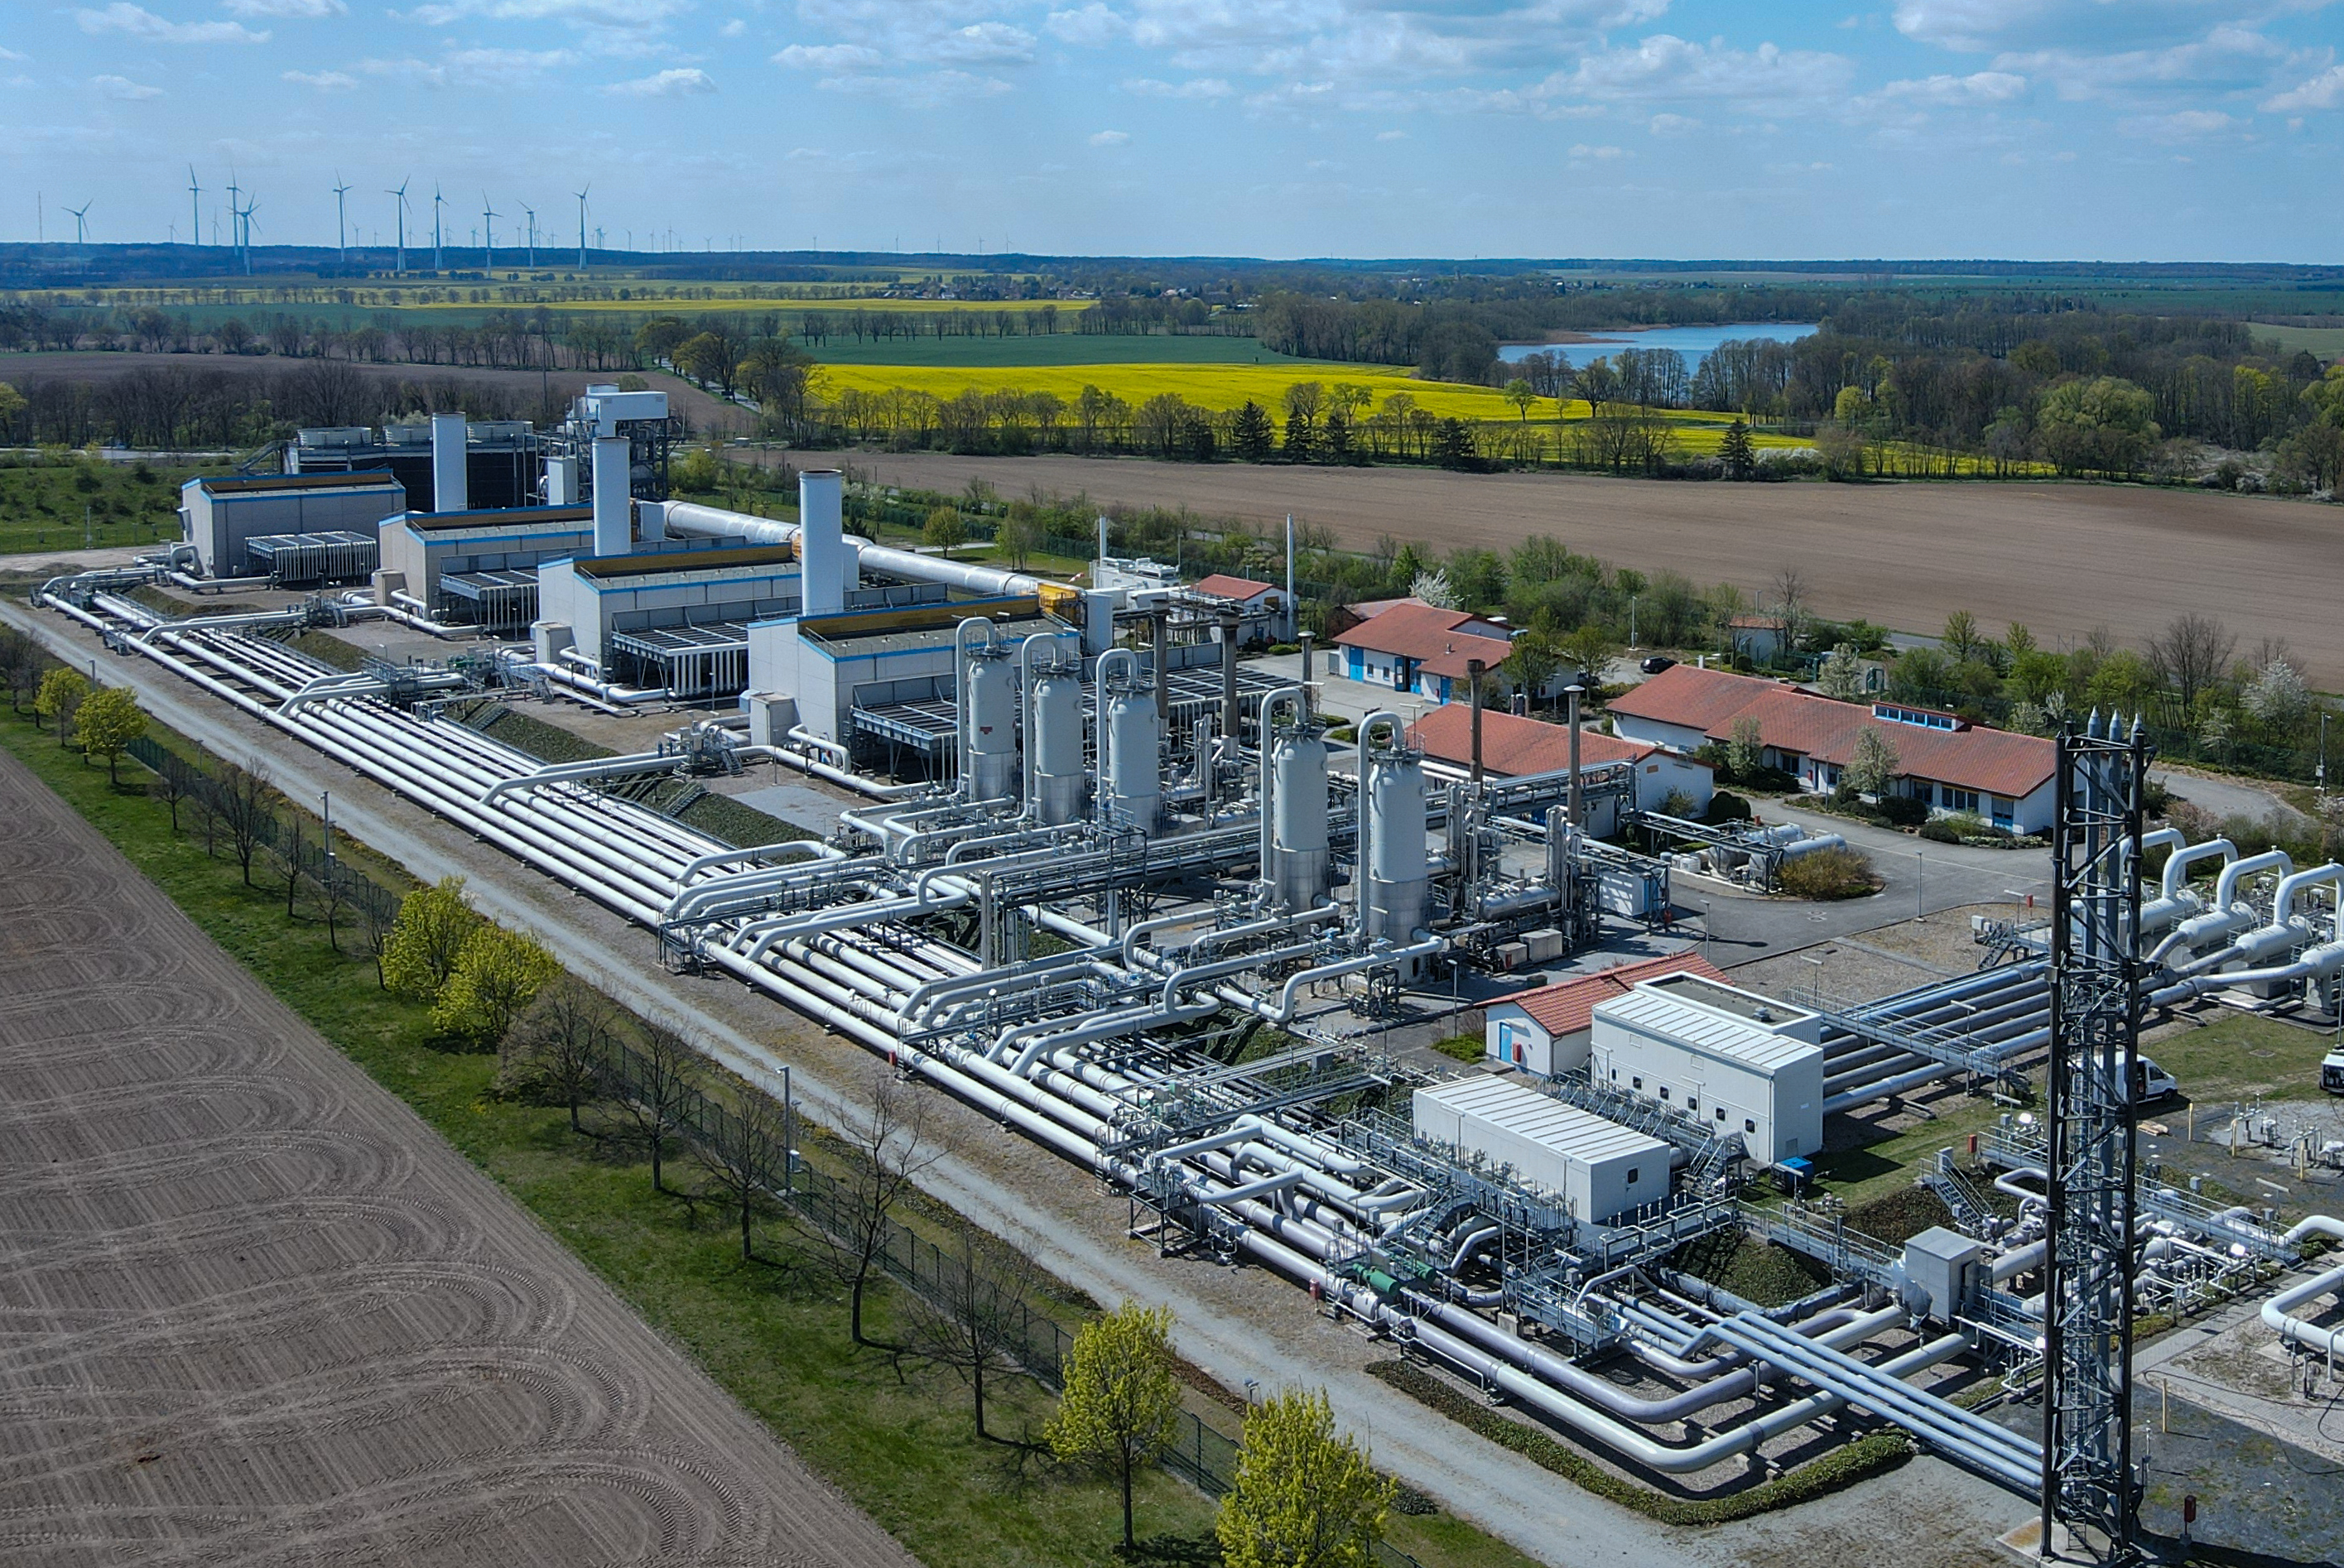 The Mallnow natural gas compressor station of Gascade Gastransport GmbH on April 27, in Brandenburg, Germany.  The compressor station in Malno near the German-Polish border receives mainly Russian natural gas. 